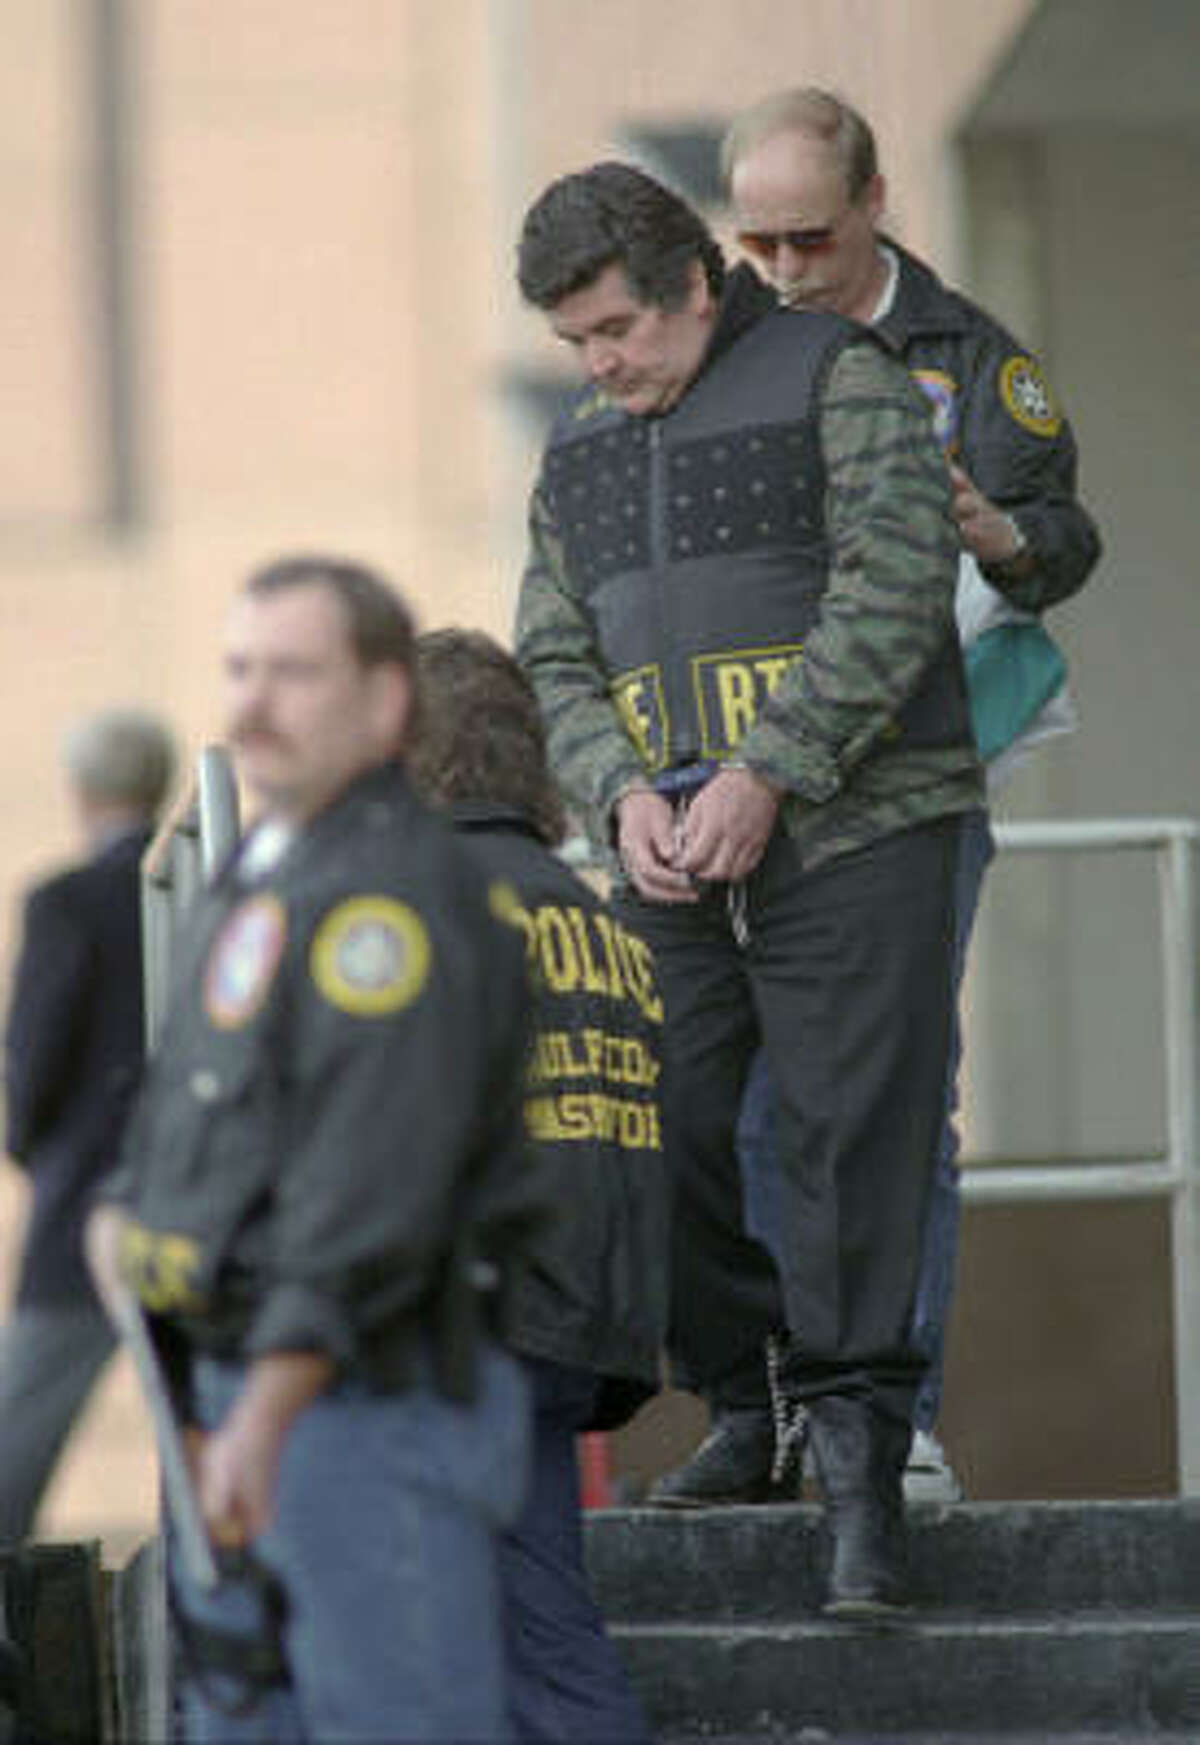 Juan Garcia Abrego, shown being escorted from the federal courthouse in 1996, was sentenced to 11 life terms, largely on the strength of testimony from a Mexican police commander who had been paid $1 million.